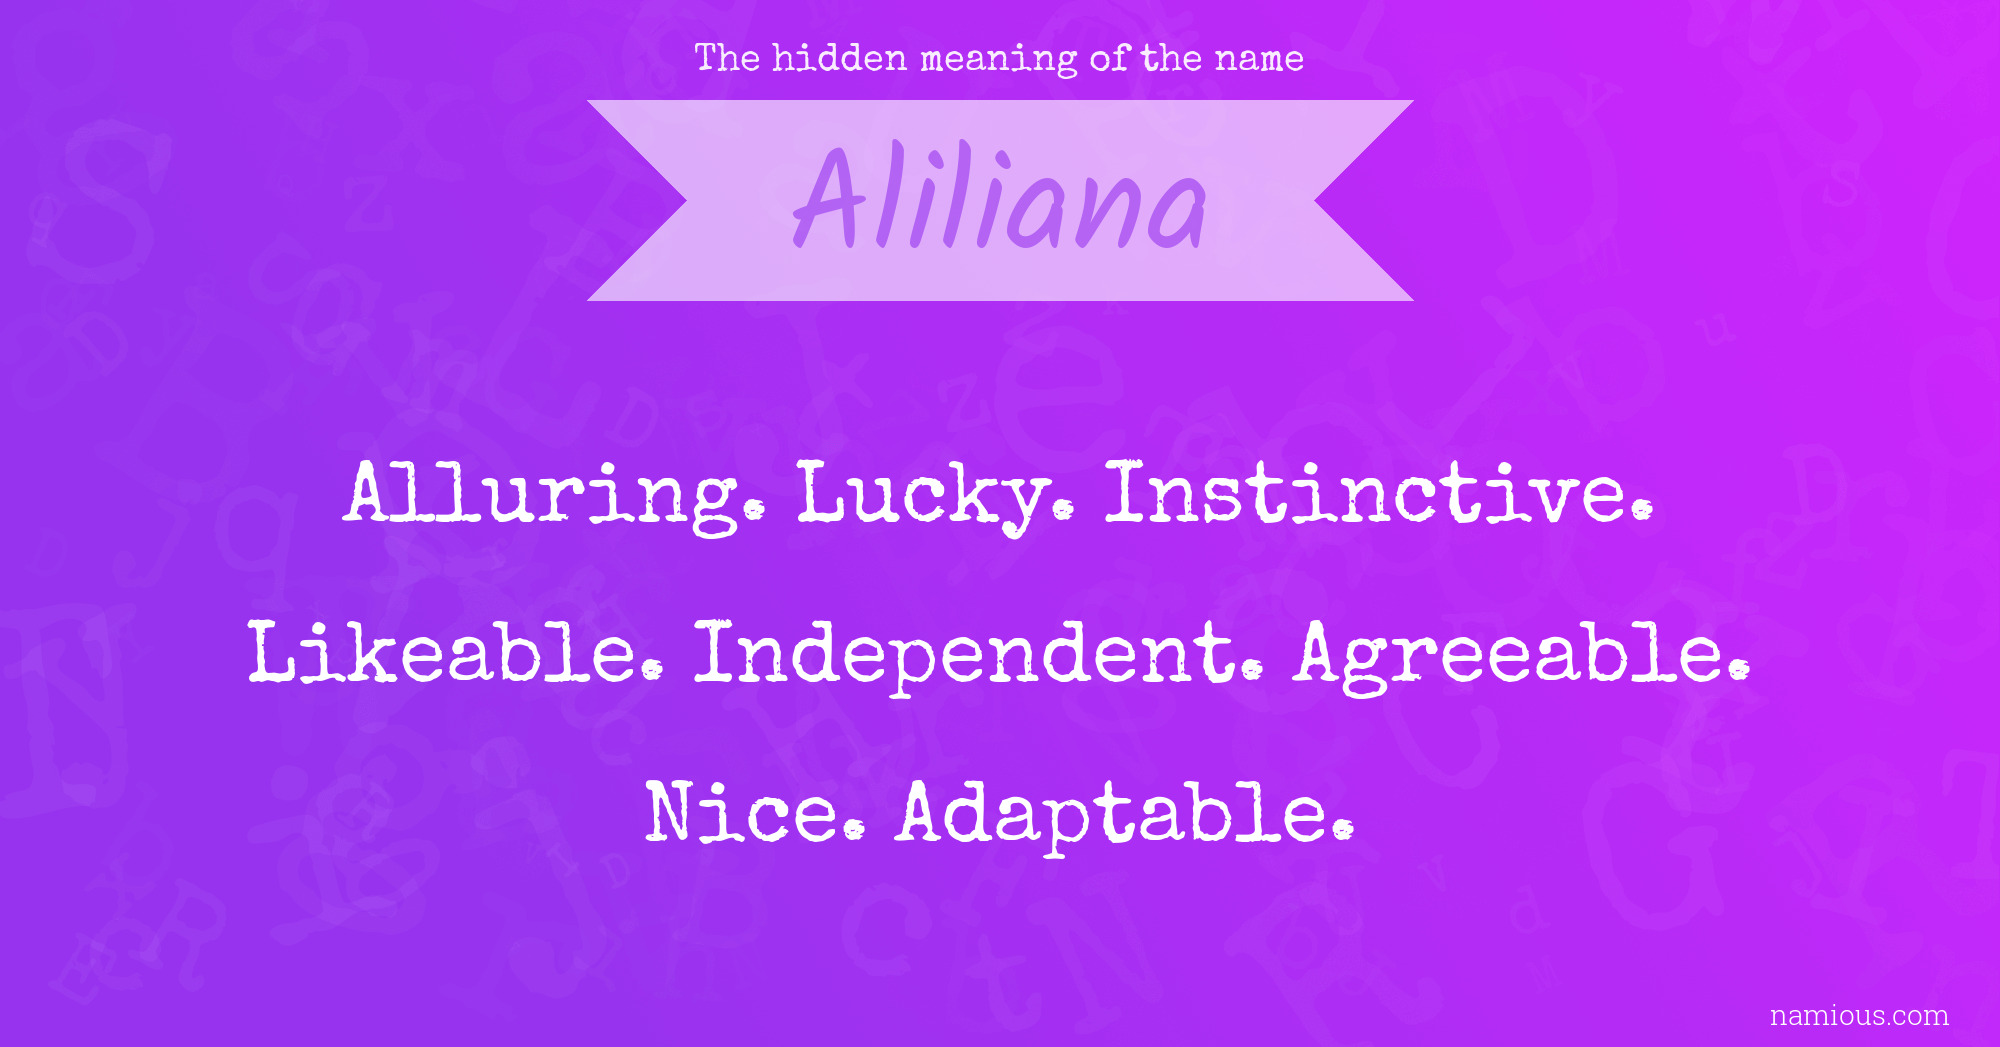 The hidden meaning of the name Aliliana